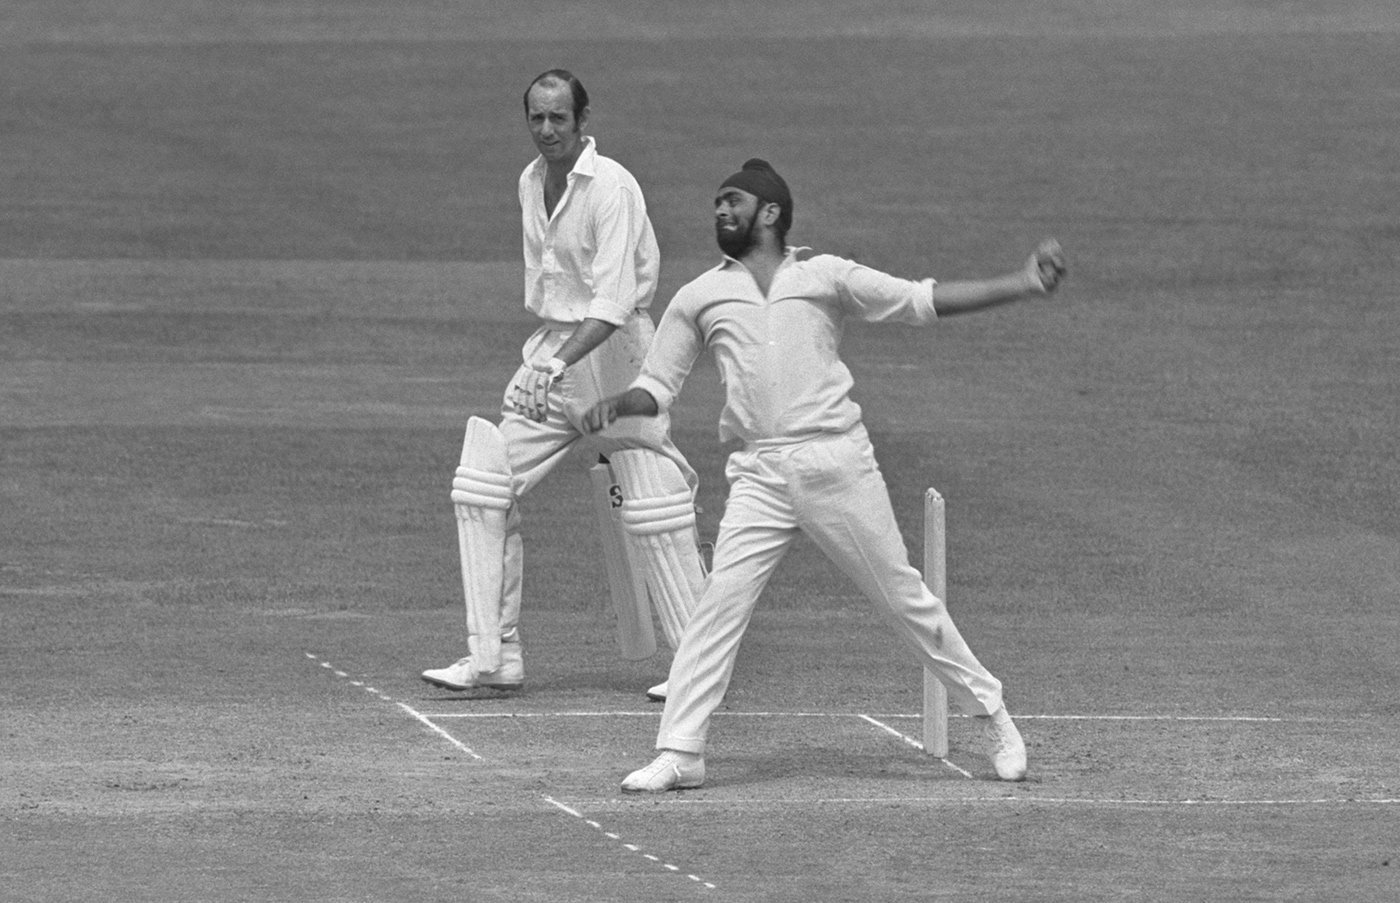 Bishan Singh Bedi master of the art of slow left-arm bowling. 67 Tests (22 as captain), 266 Wickets 10 ODIs Wickets